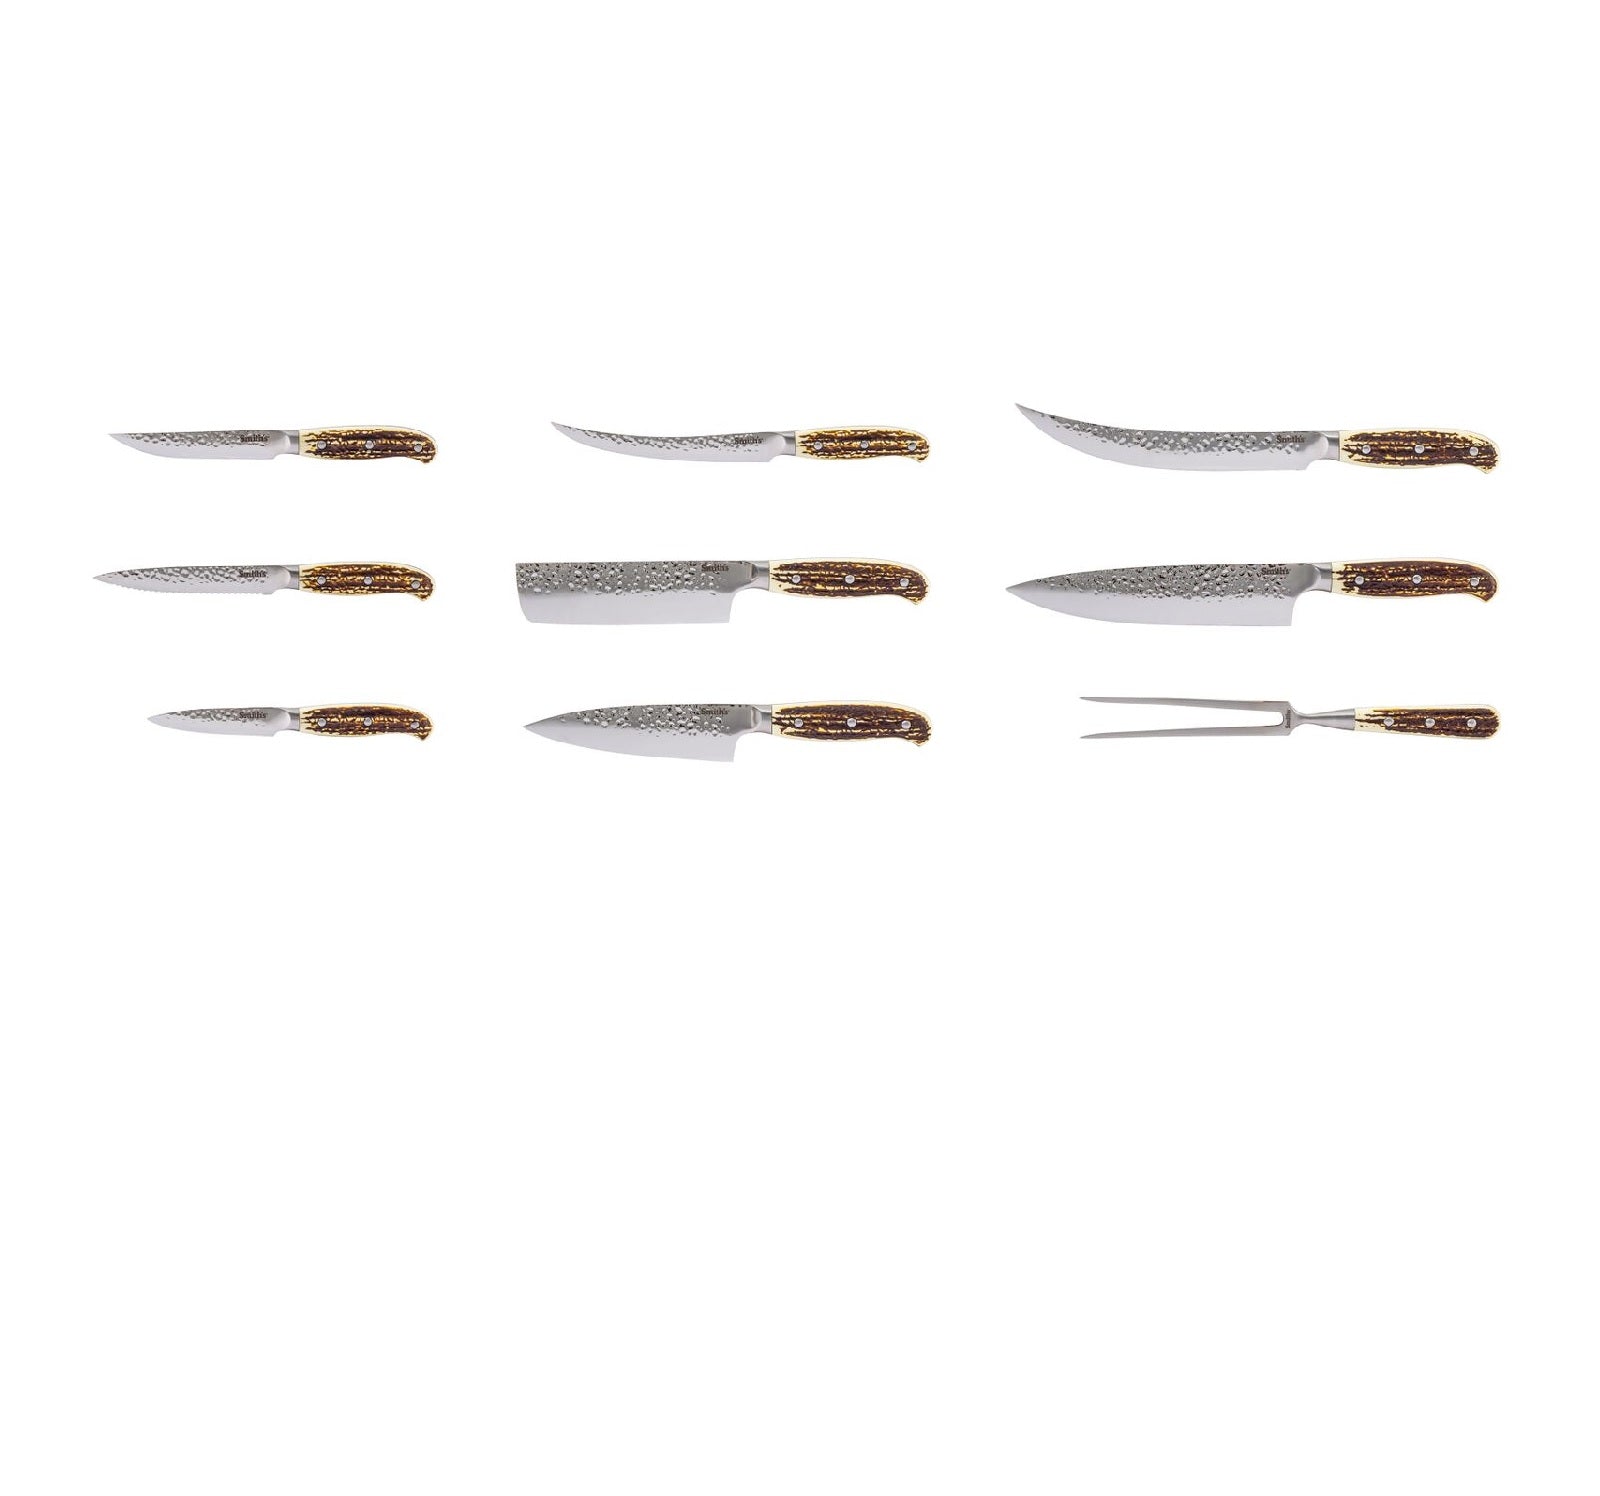 Smith Smiths Cabin and Lodge Cutlery 15-PCS Block Set